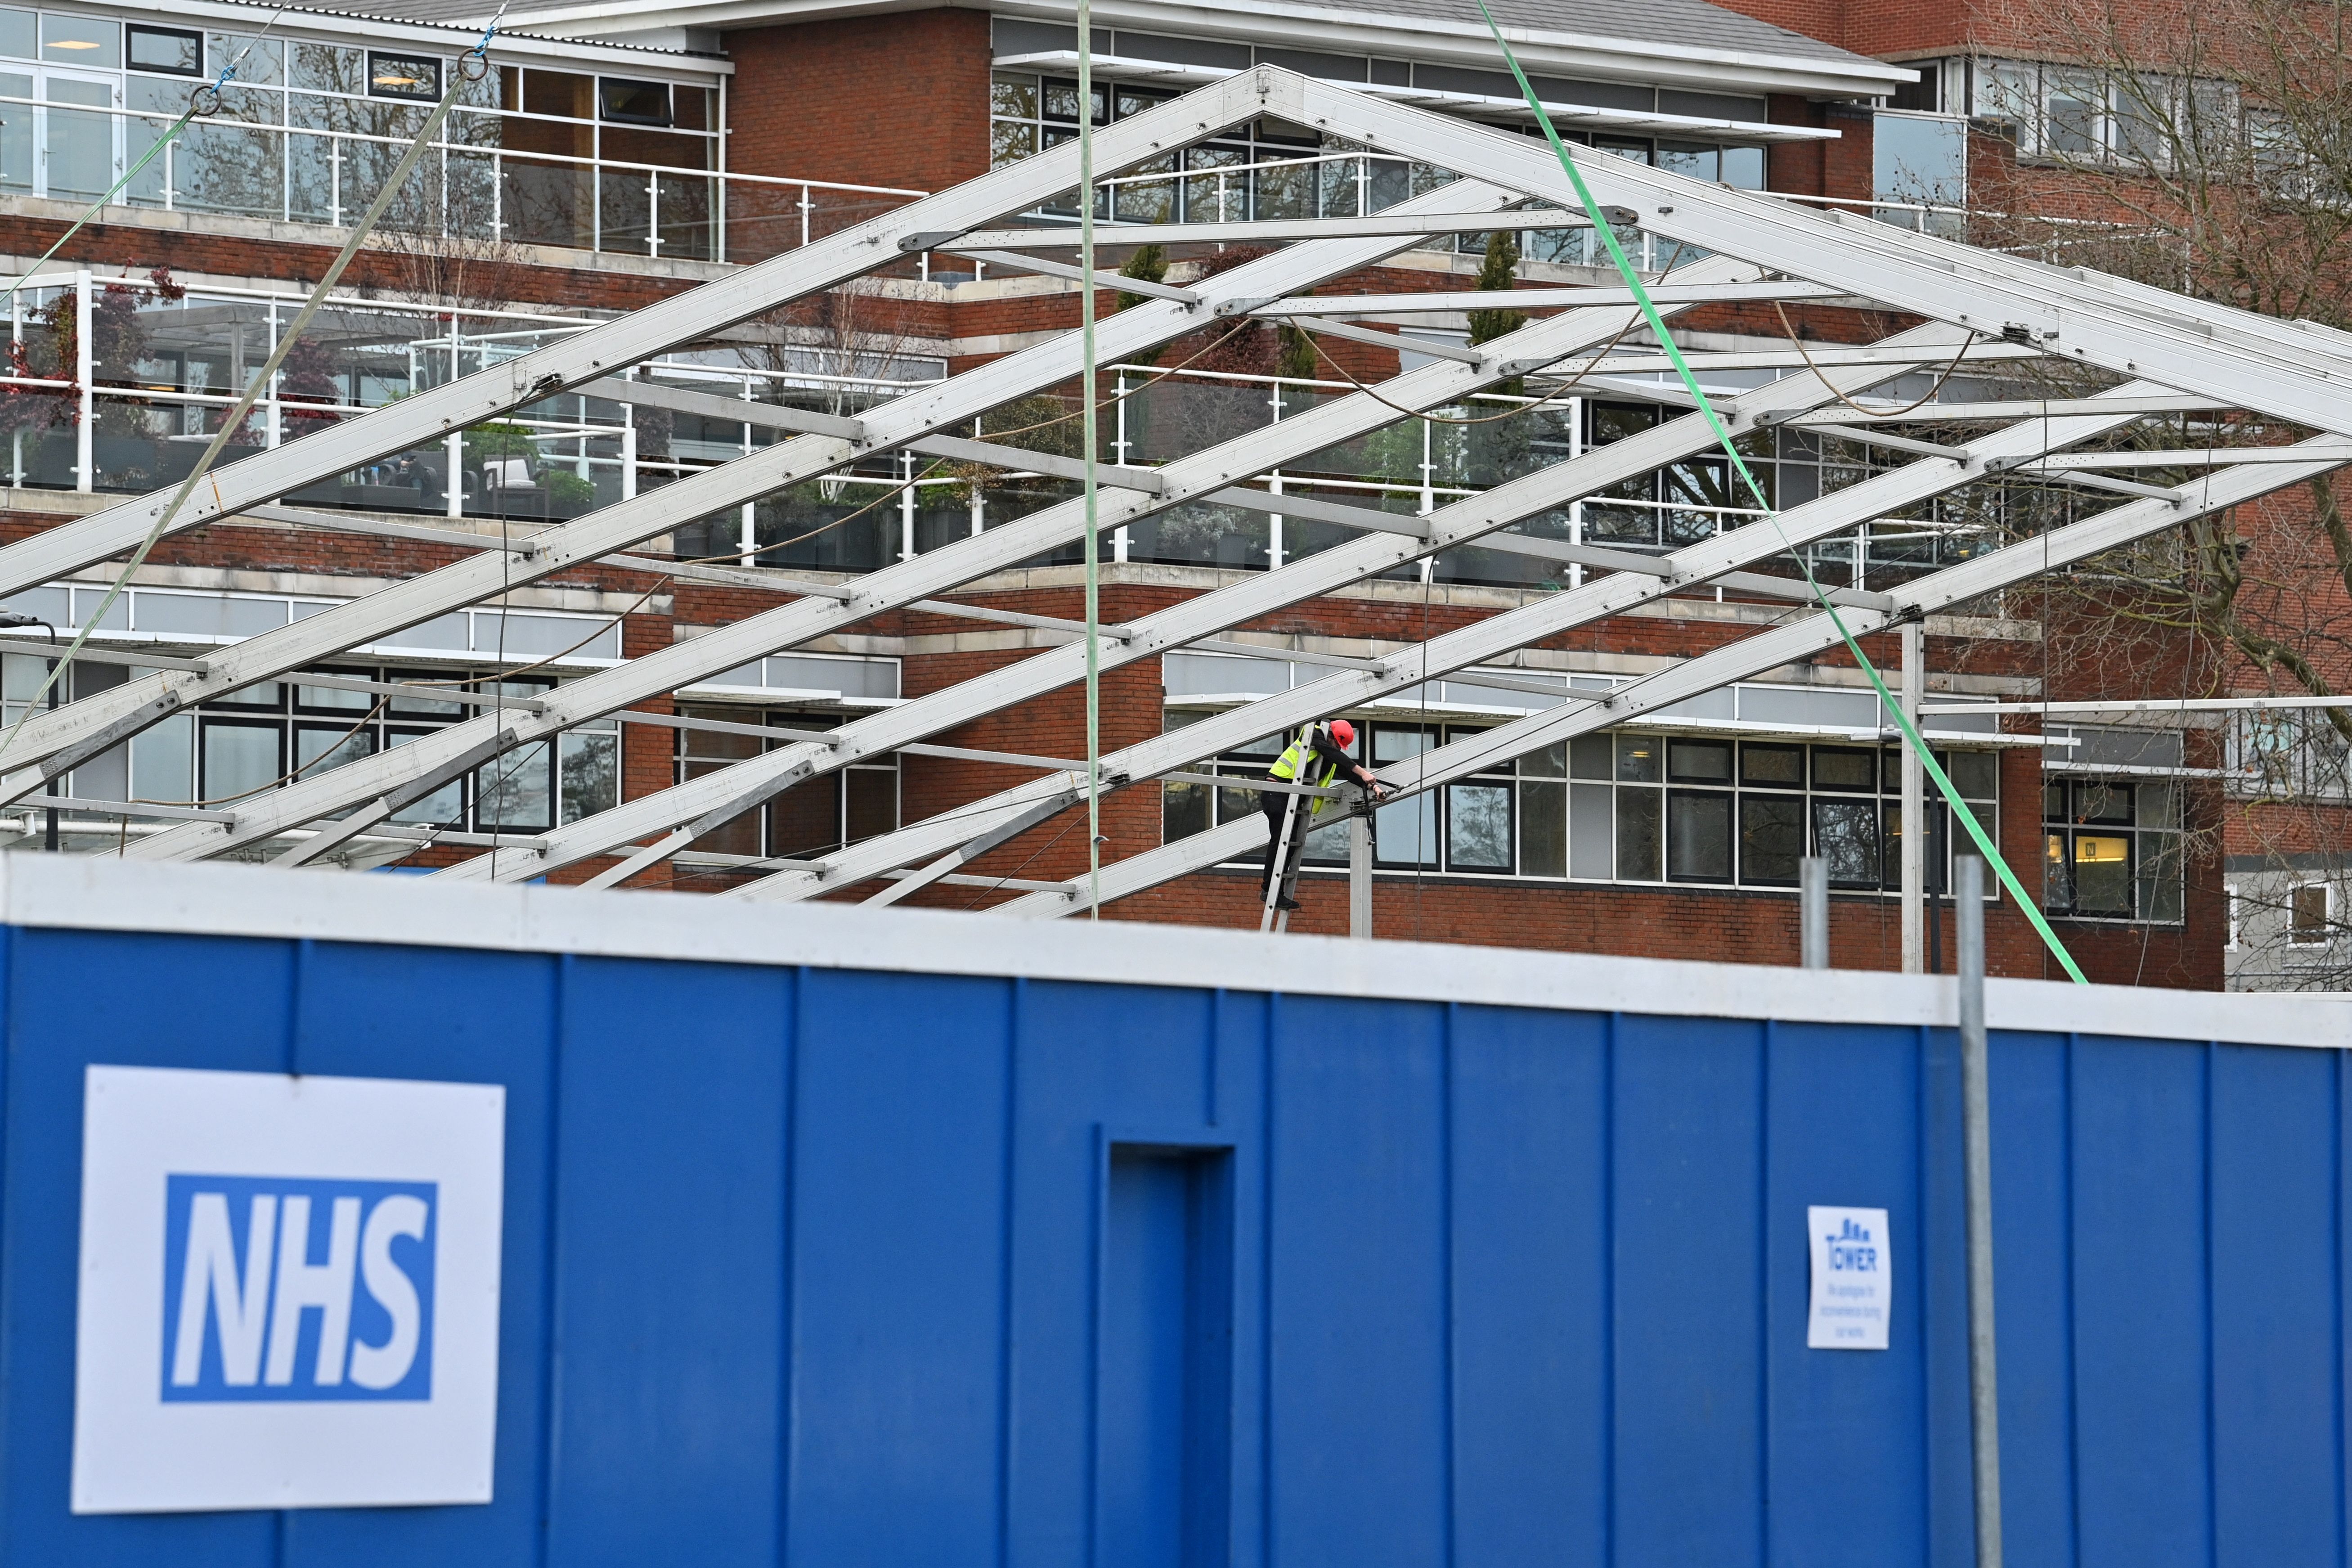 A member of a construction team works on the erection of a temporary field hospital in the grounds of St George's Hospital in Tooting, south London on December 30, 2021, as the number of daily Covid-19 cases has increased, fuelled by the highly contagious Omicron variant. - England is set to open temporary field hospitals to contain a possible overspill of inpatients due to a surge in coronavirus cases, the national health service said Thursday. 